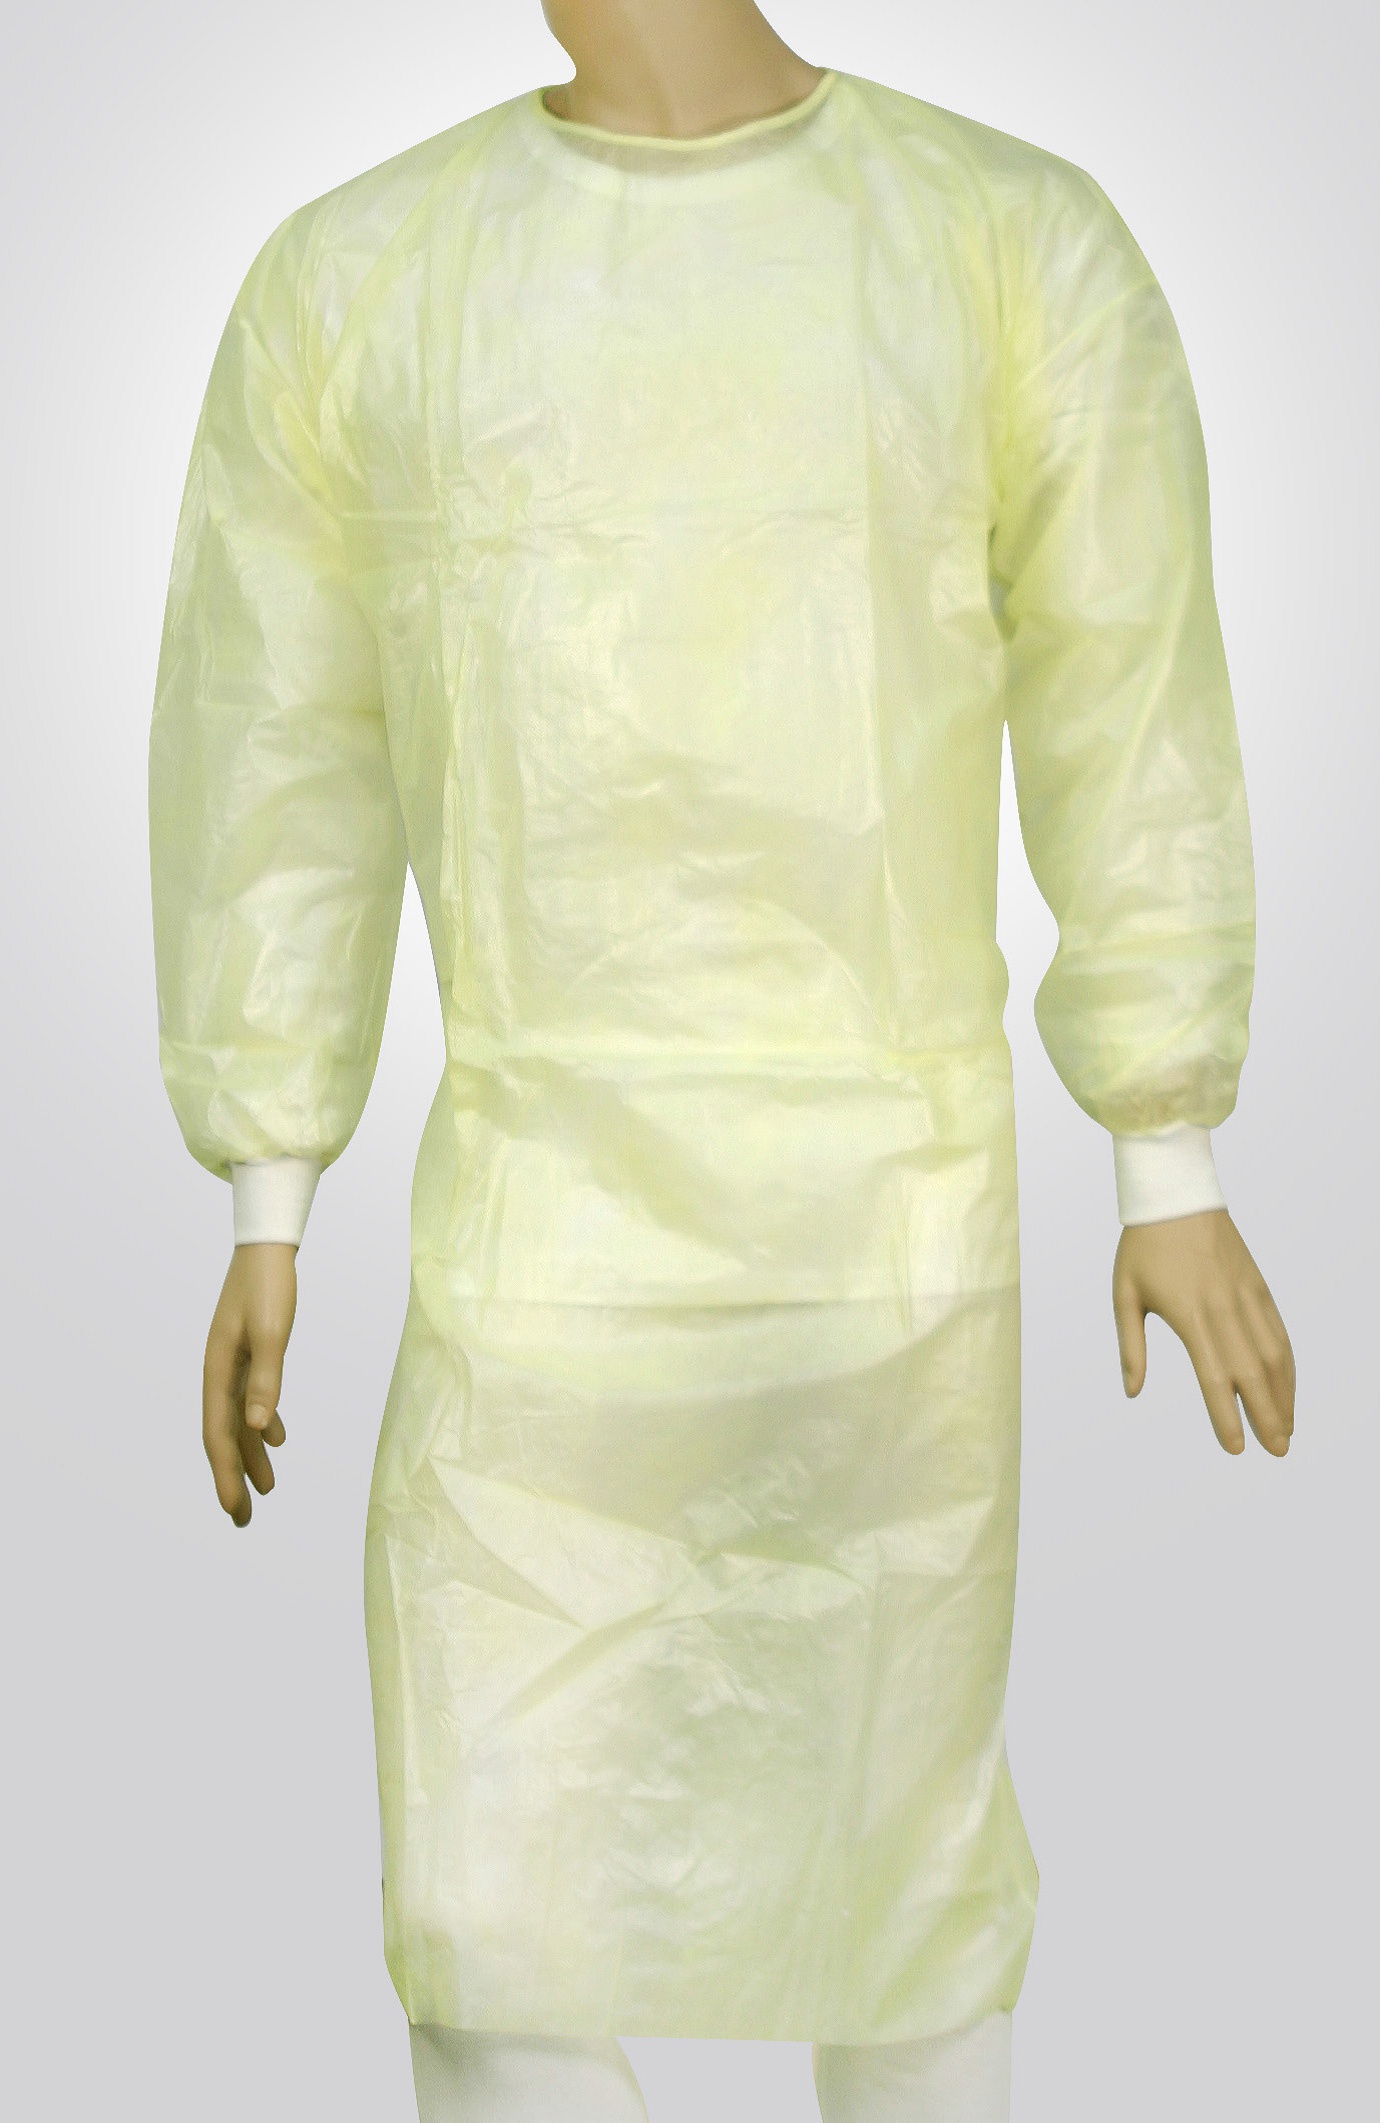 Gowns Isolation Yellow Fully Laminated with Cuffs 40gsm - Box 50 image 0